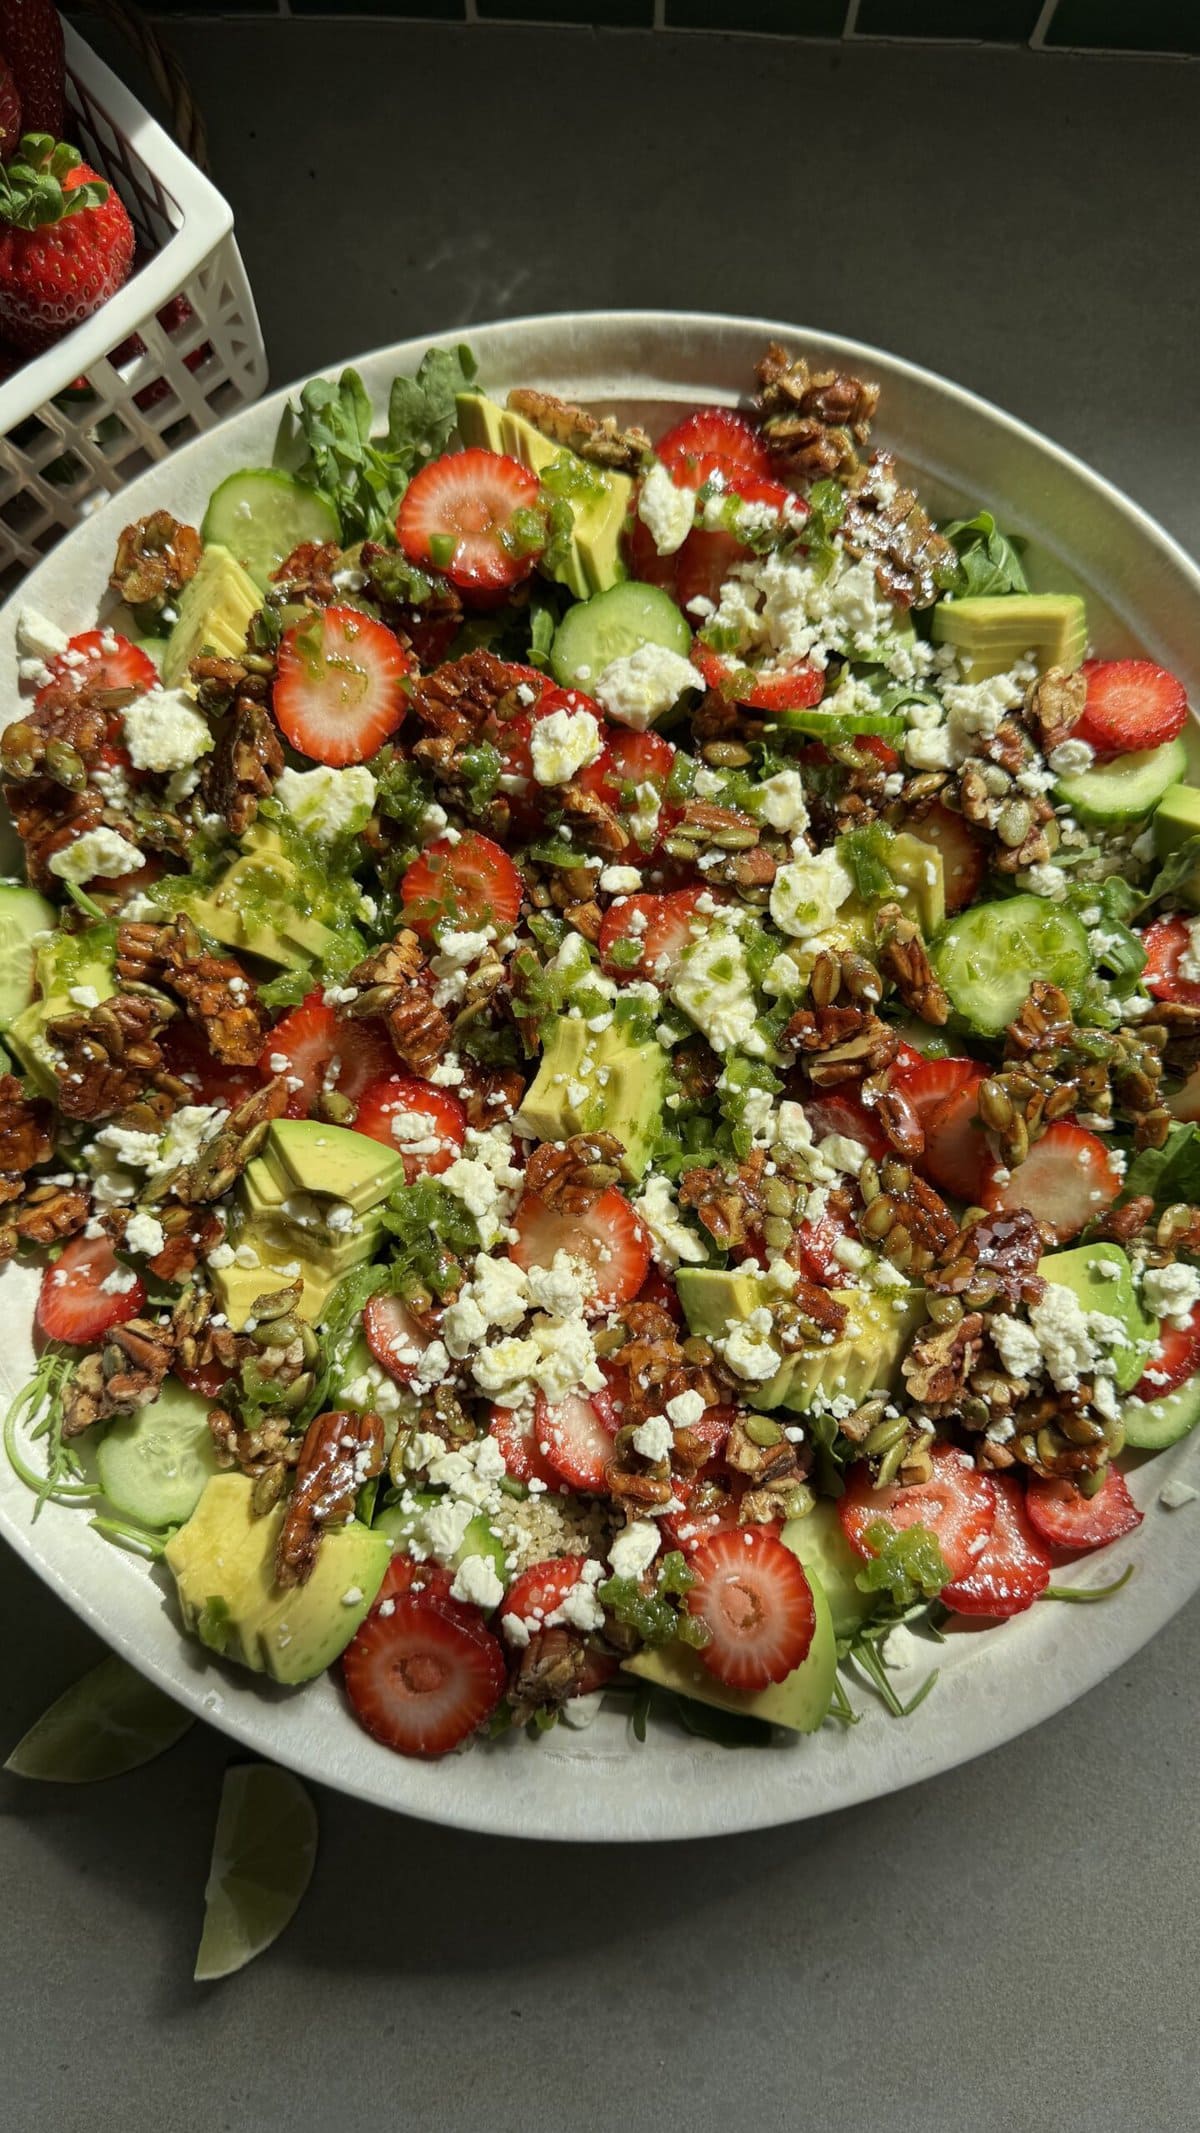 Overhead view of strawberry salad with brittle.